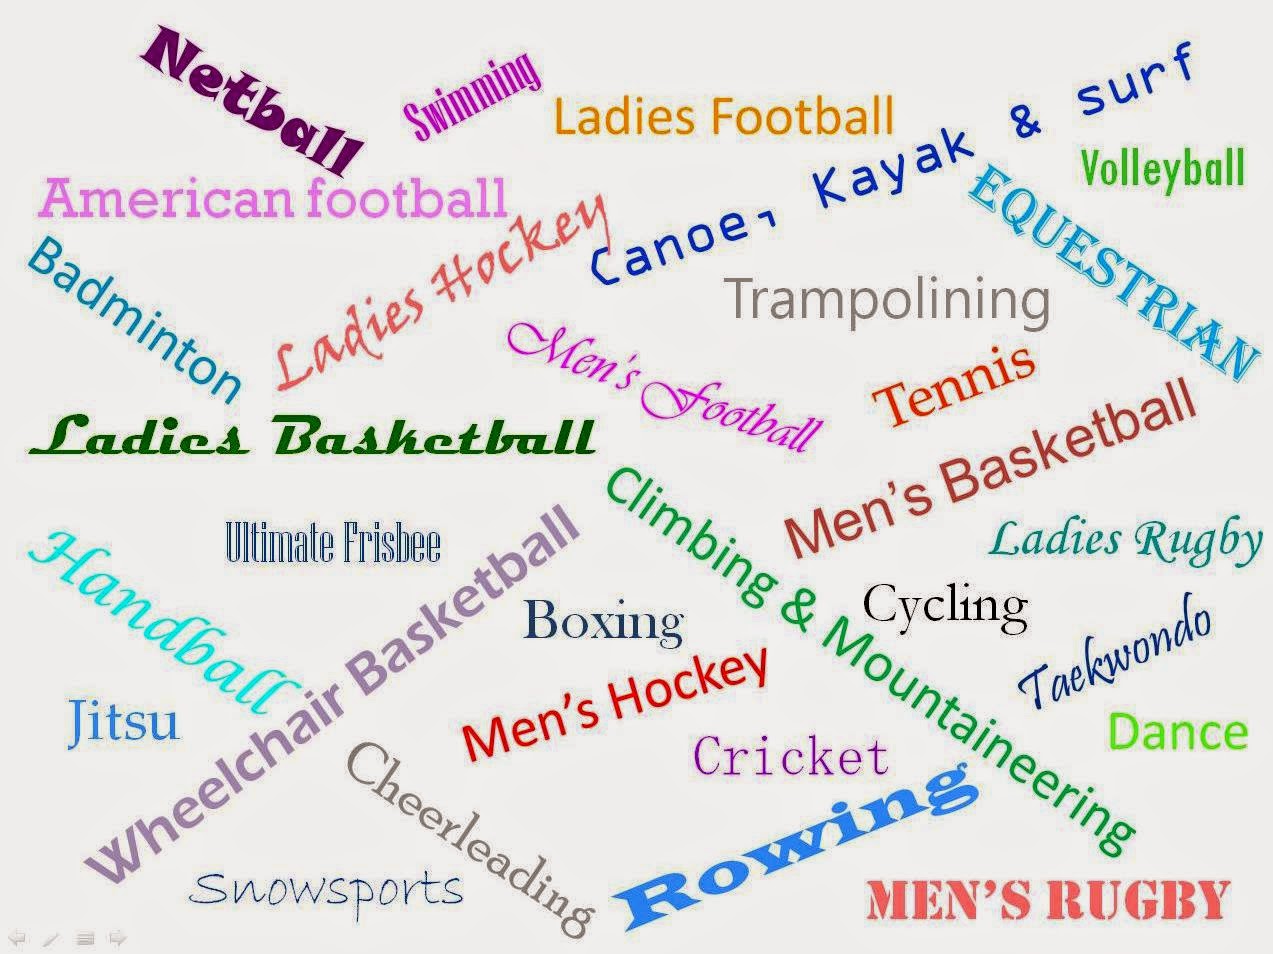 SPORTS AND HOBBIES